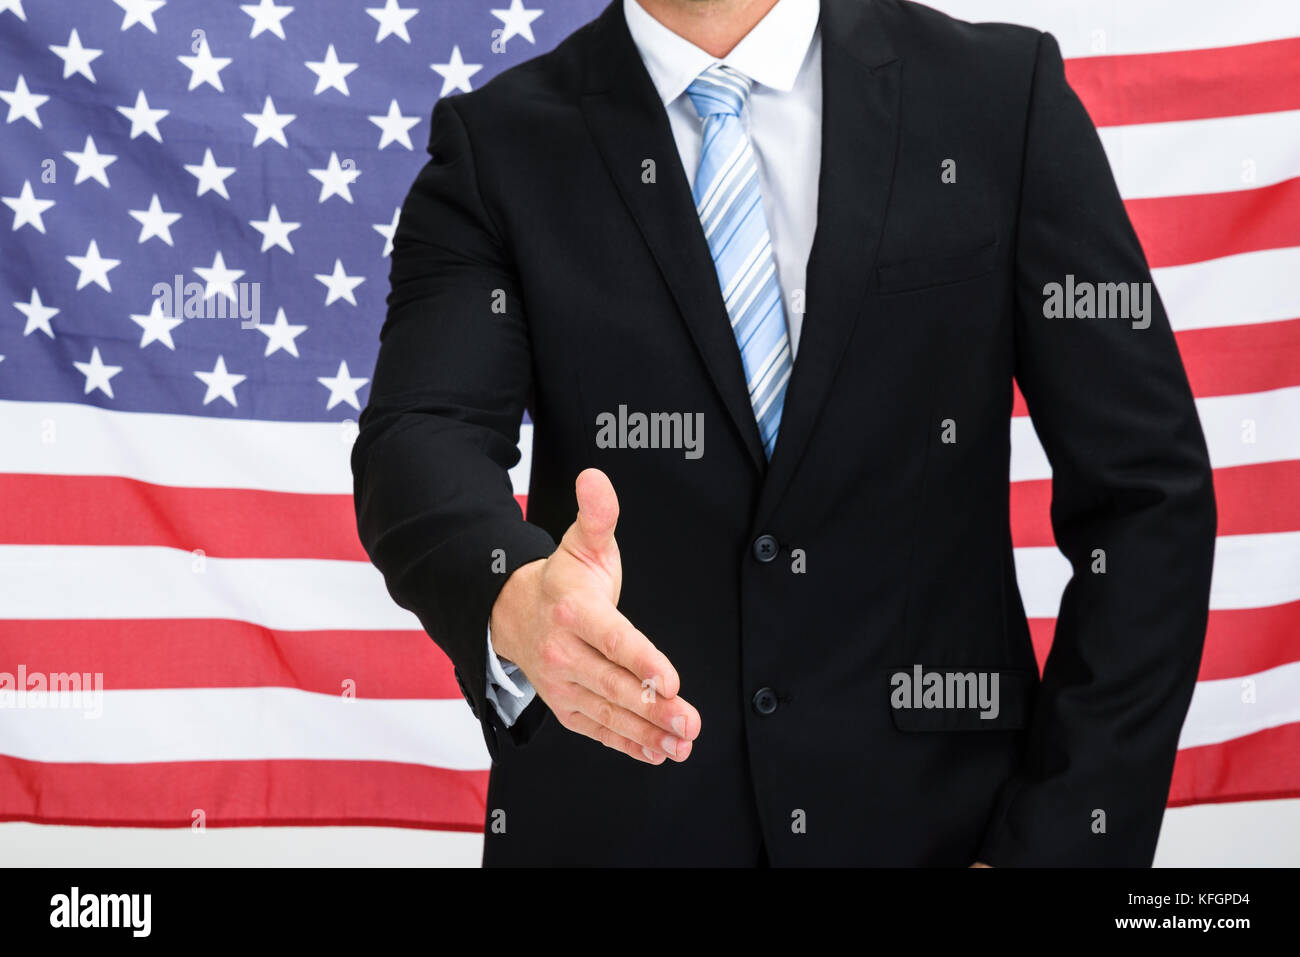 American Businessman In Front Of Usa Flag Offering Handshake Stock Photo